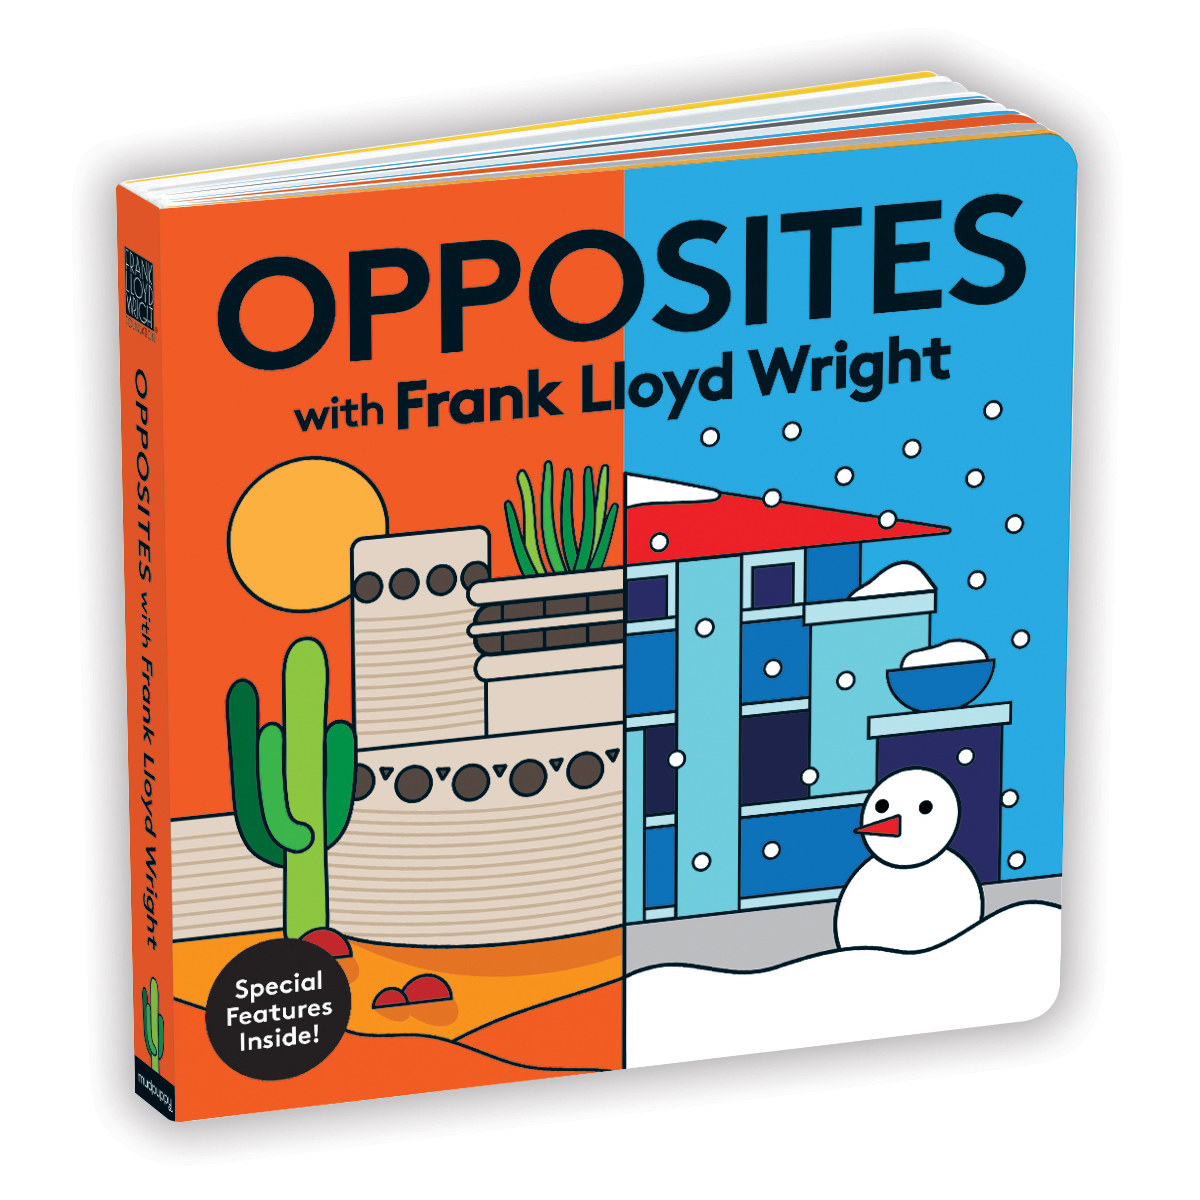 Opposites book with Frank Lloyd Wright